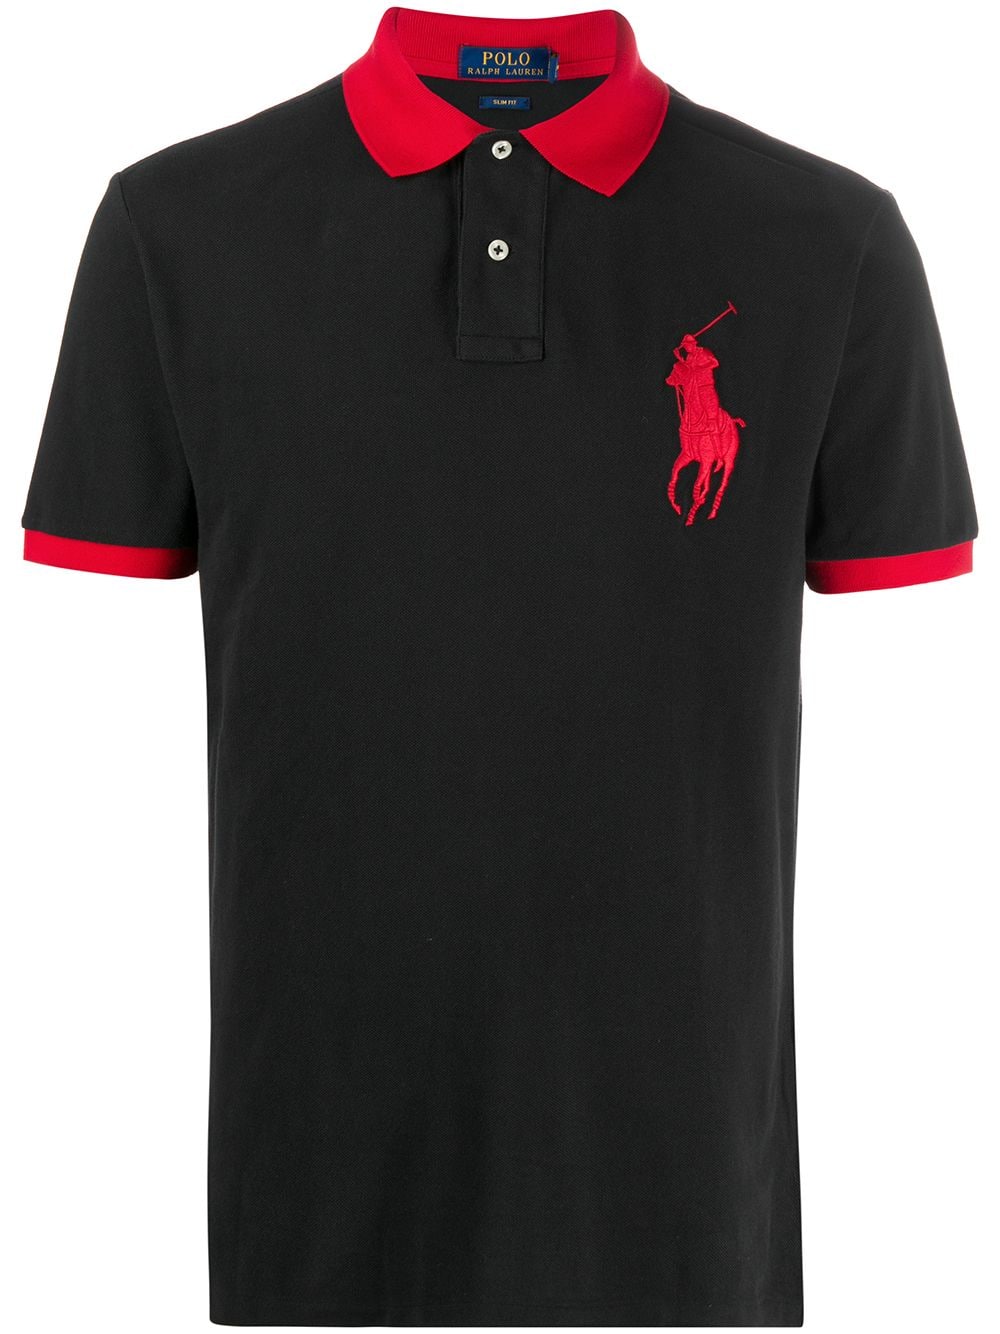 black and red ralph lauren polo shirt